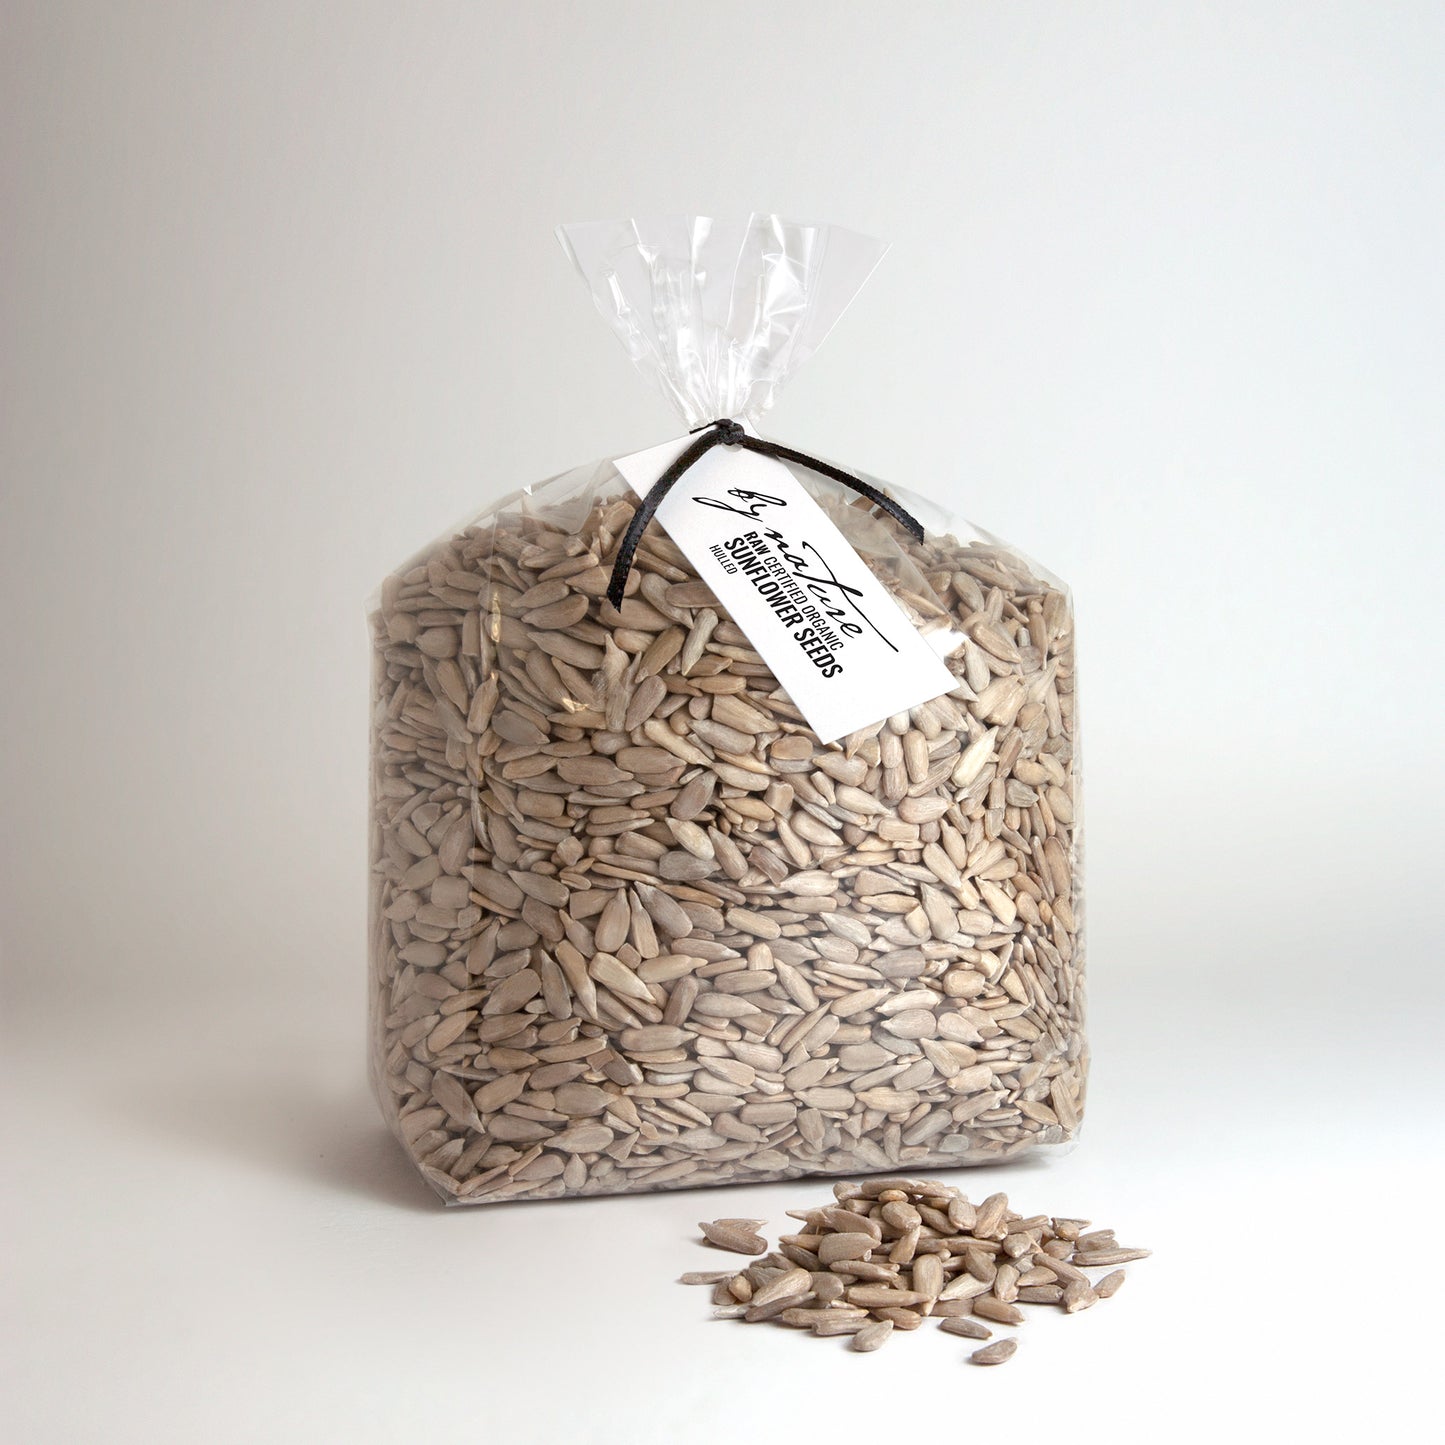 BY NATURE Sunflower Seeds, 1kg - hulled, raw, certified organic at source.